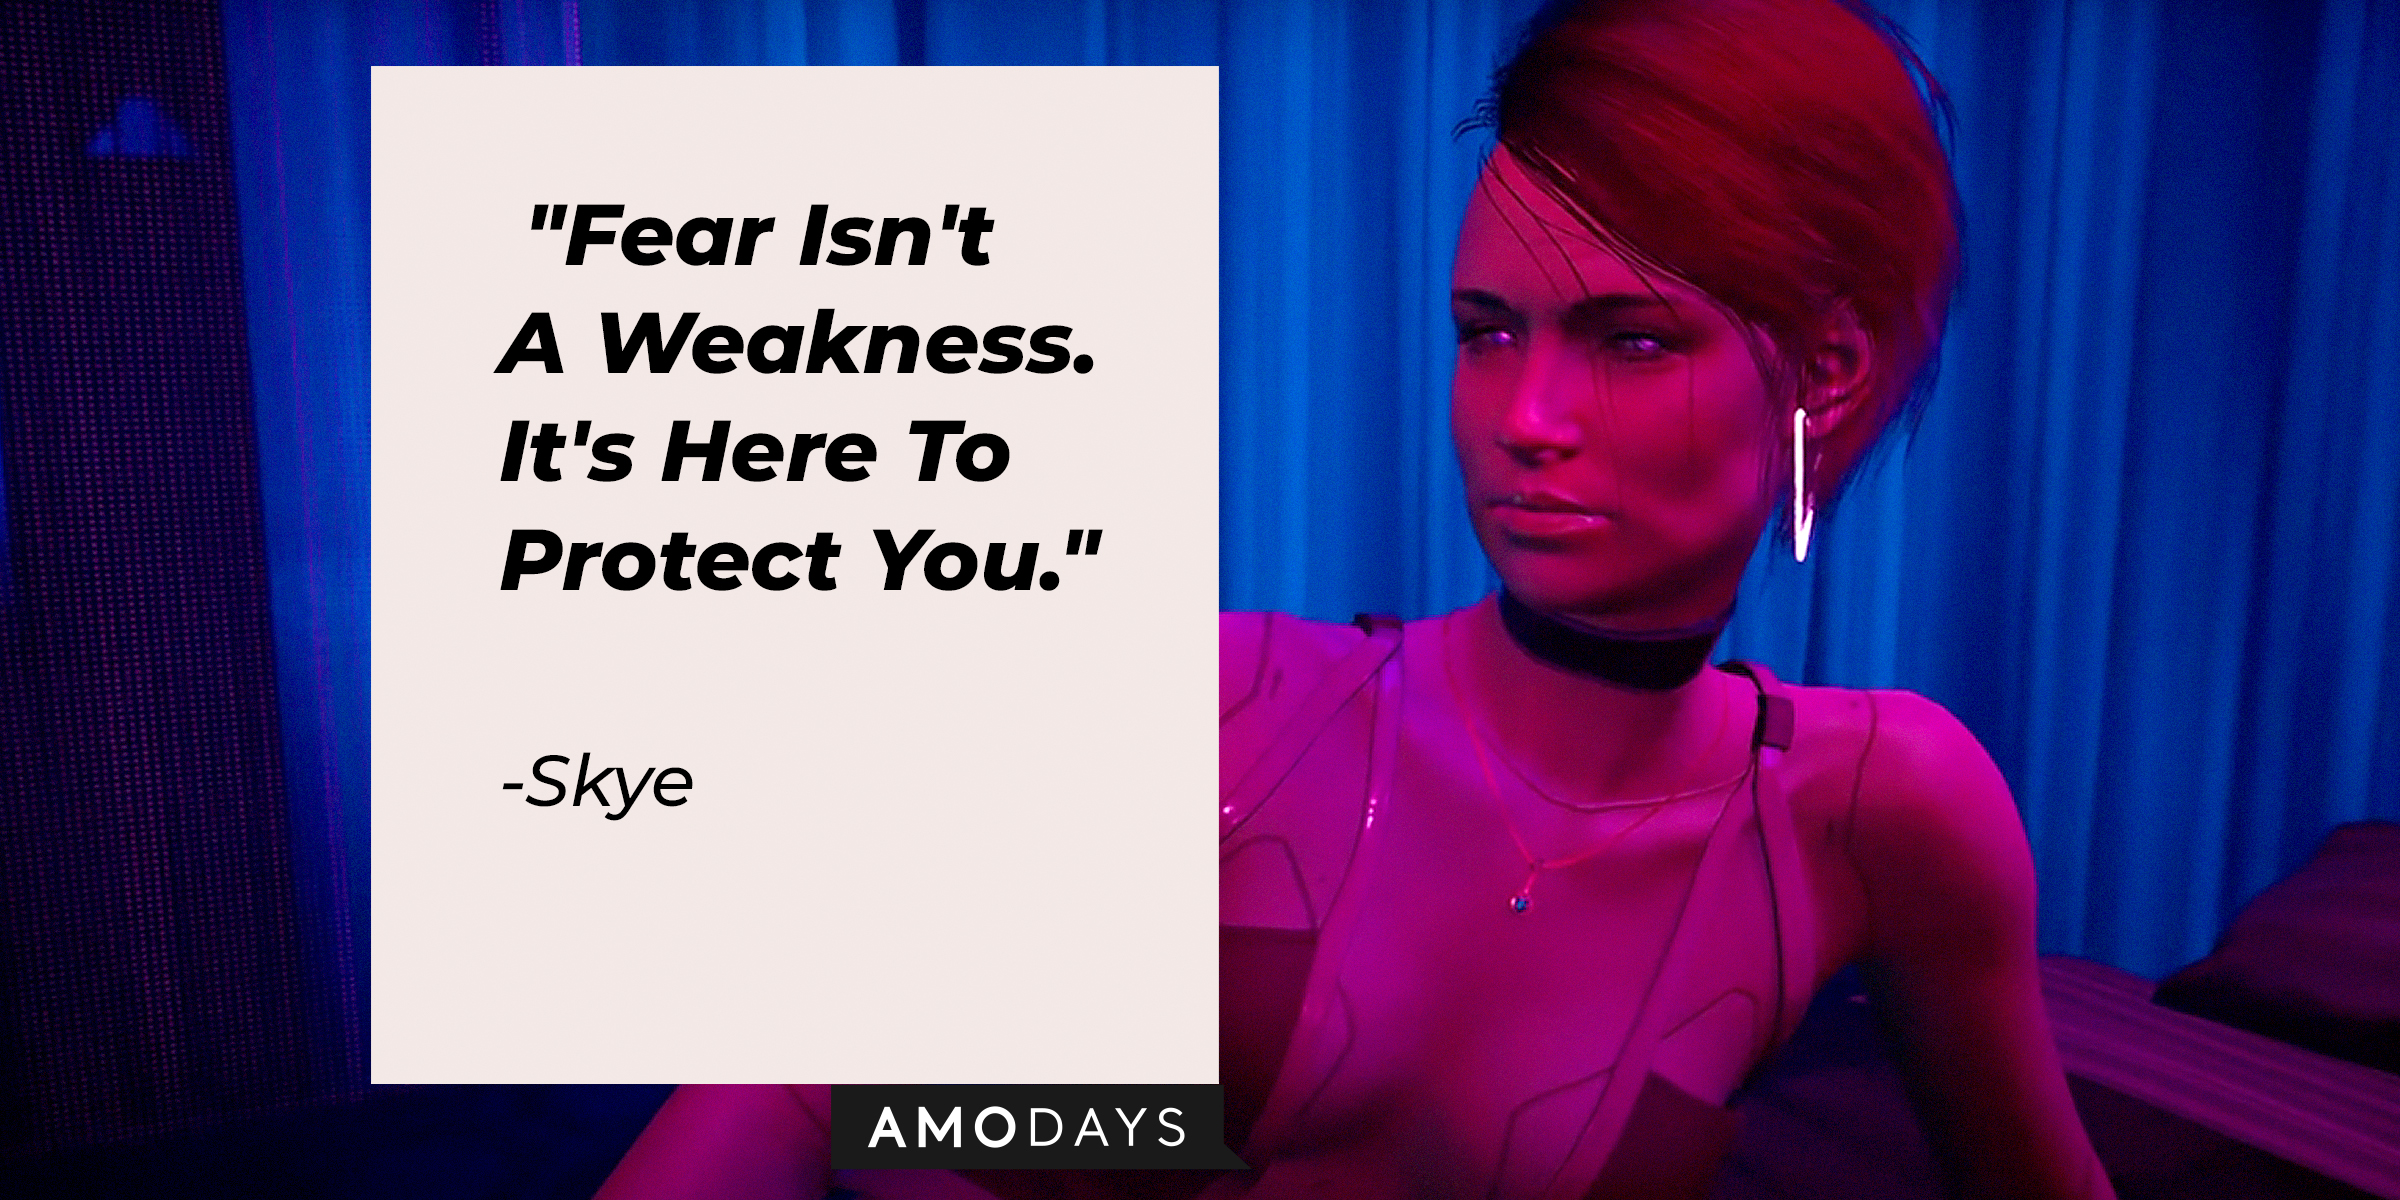 A photo of Skye with Skye's quote: "Fear Isn't A Weakness. It's Here To Protect You." | Source: youtube.com/CyberpunkGame